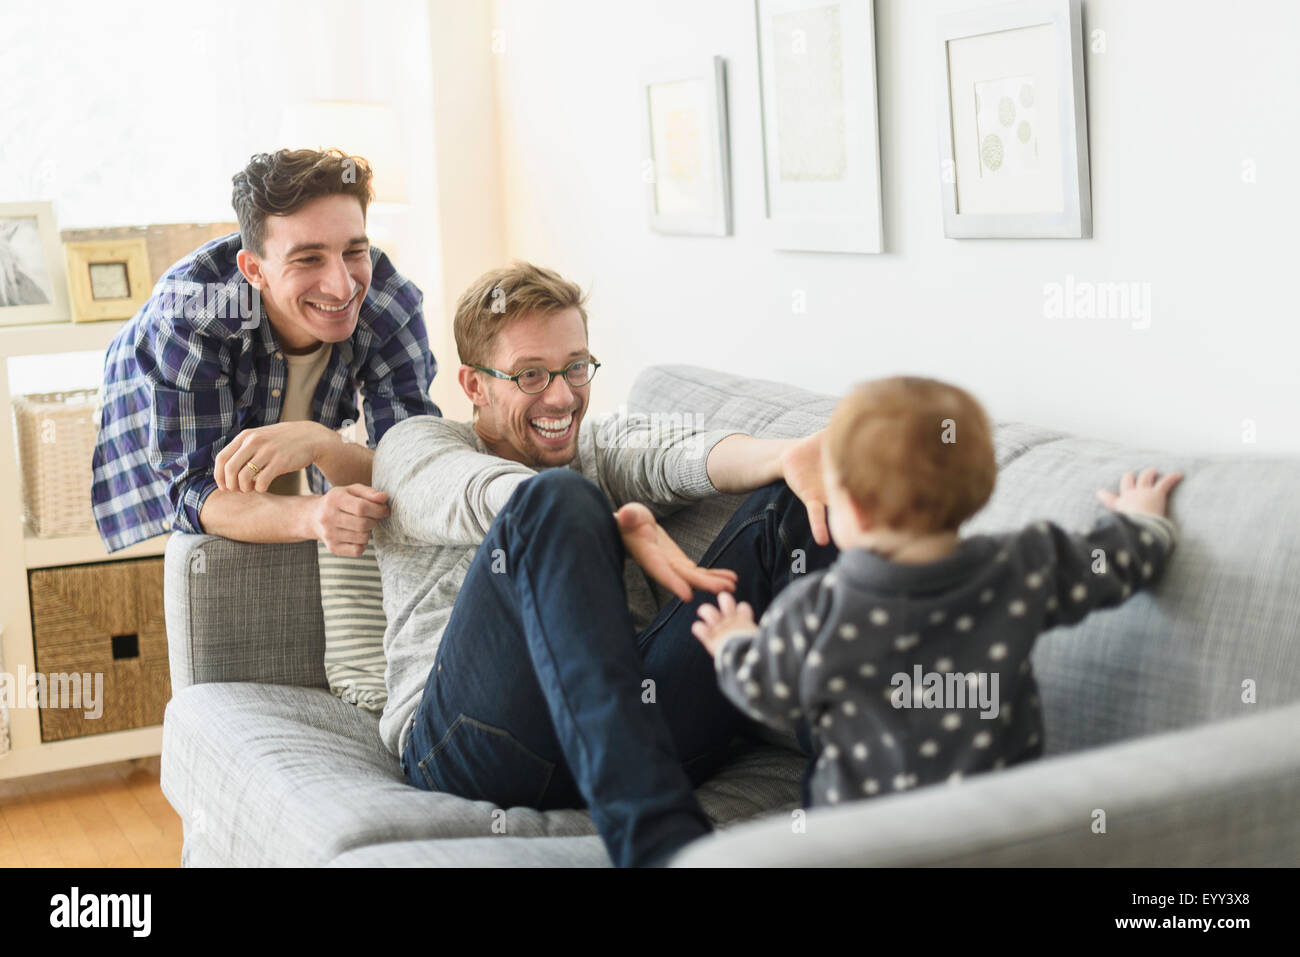 Caucasian gay fathers and baby relaxing on sofa Stock Photo